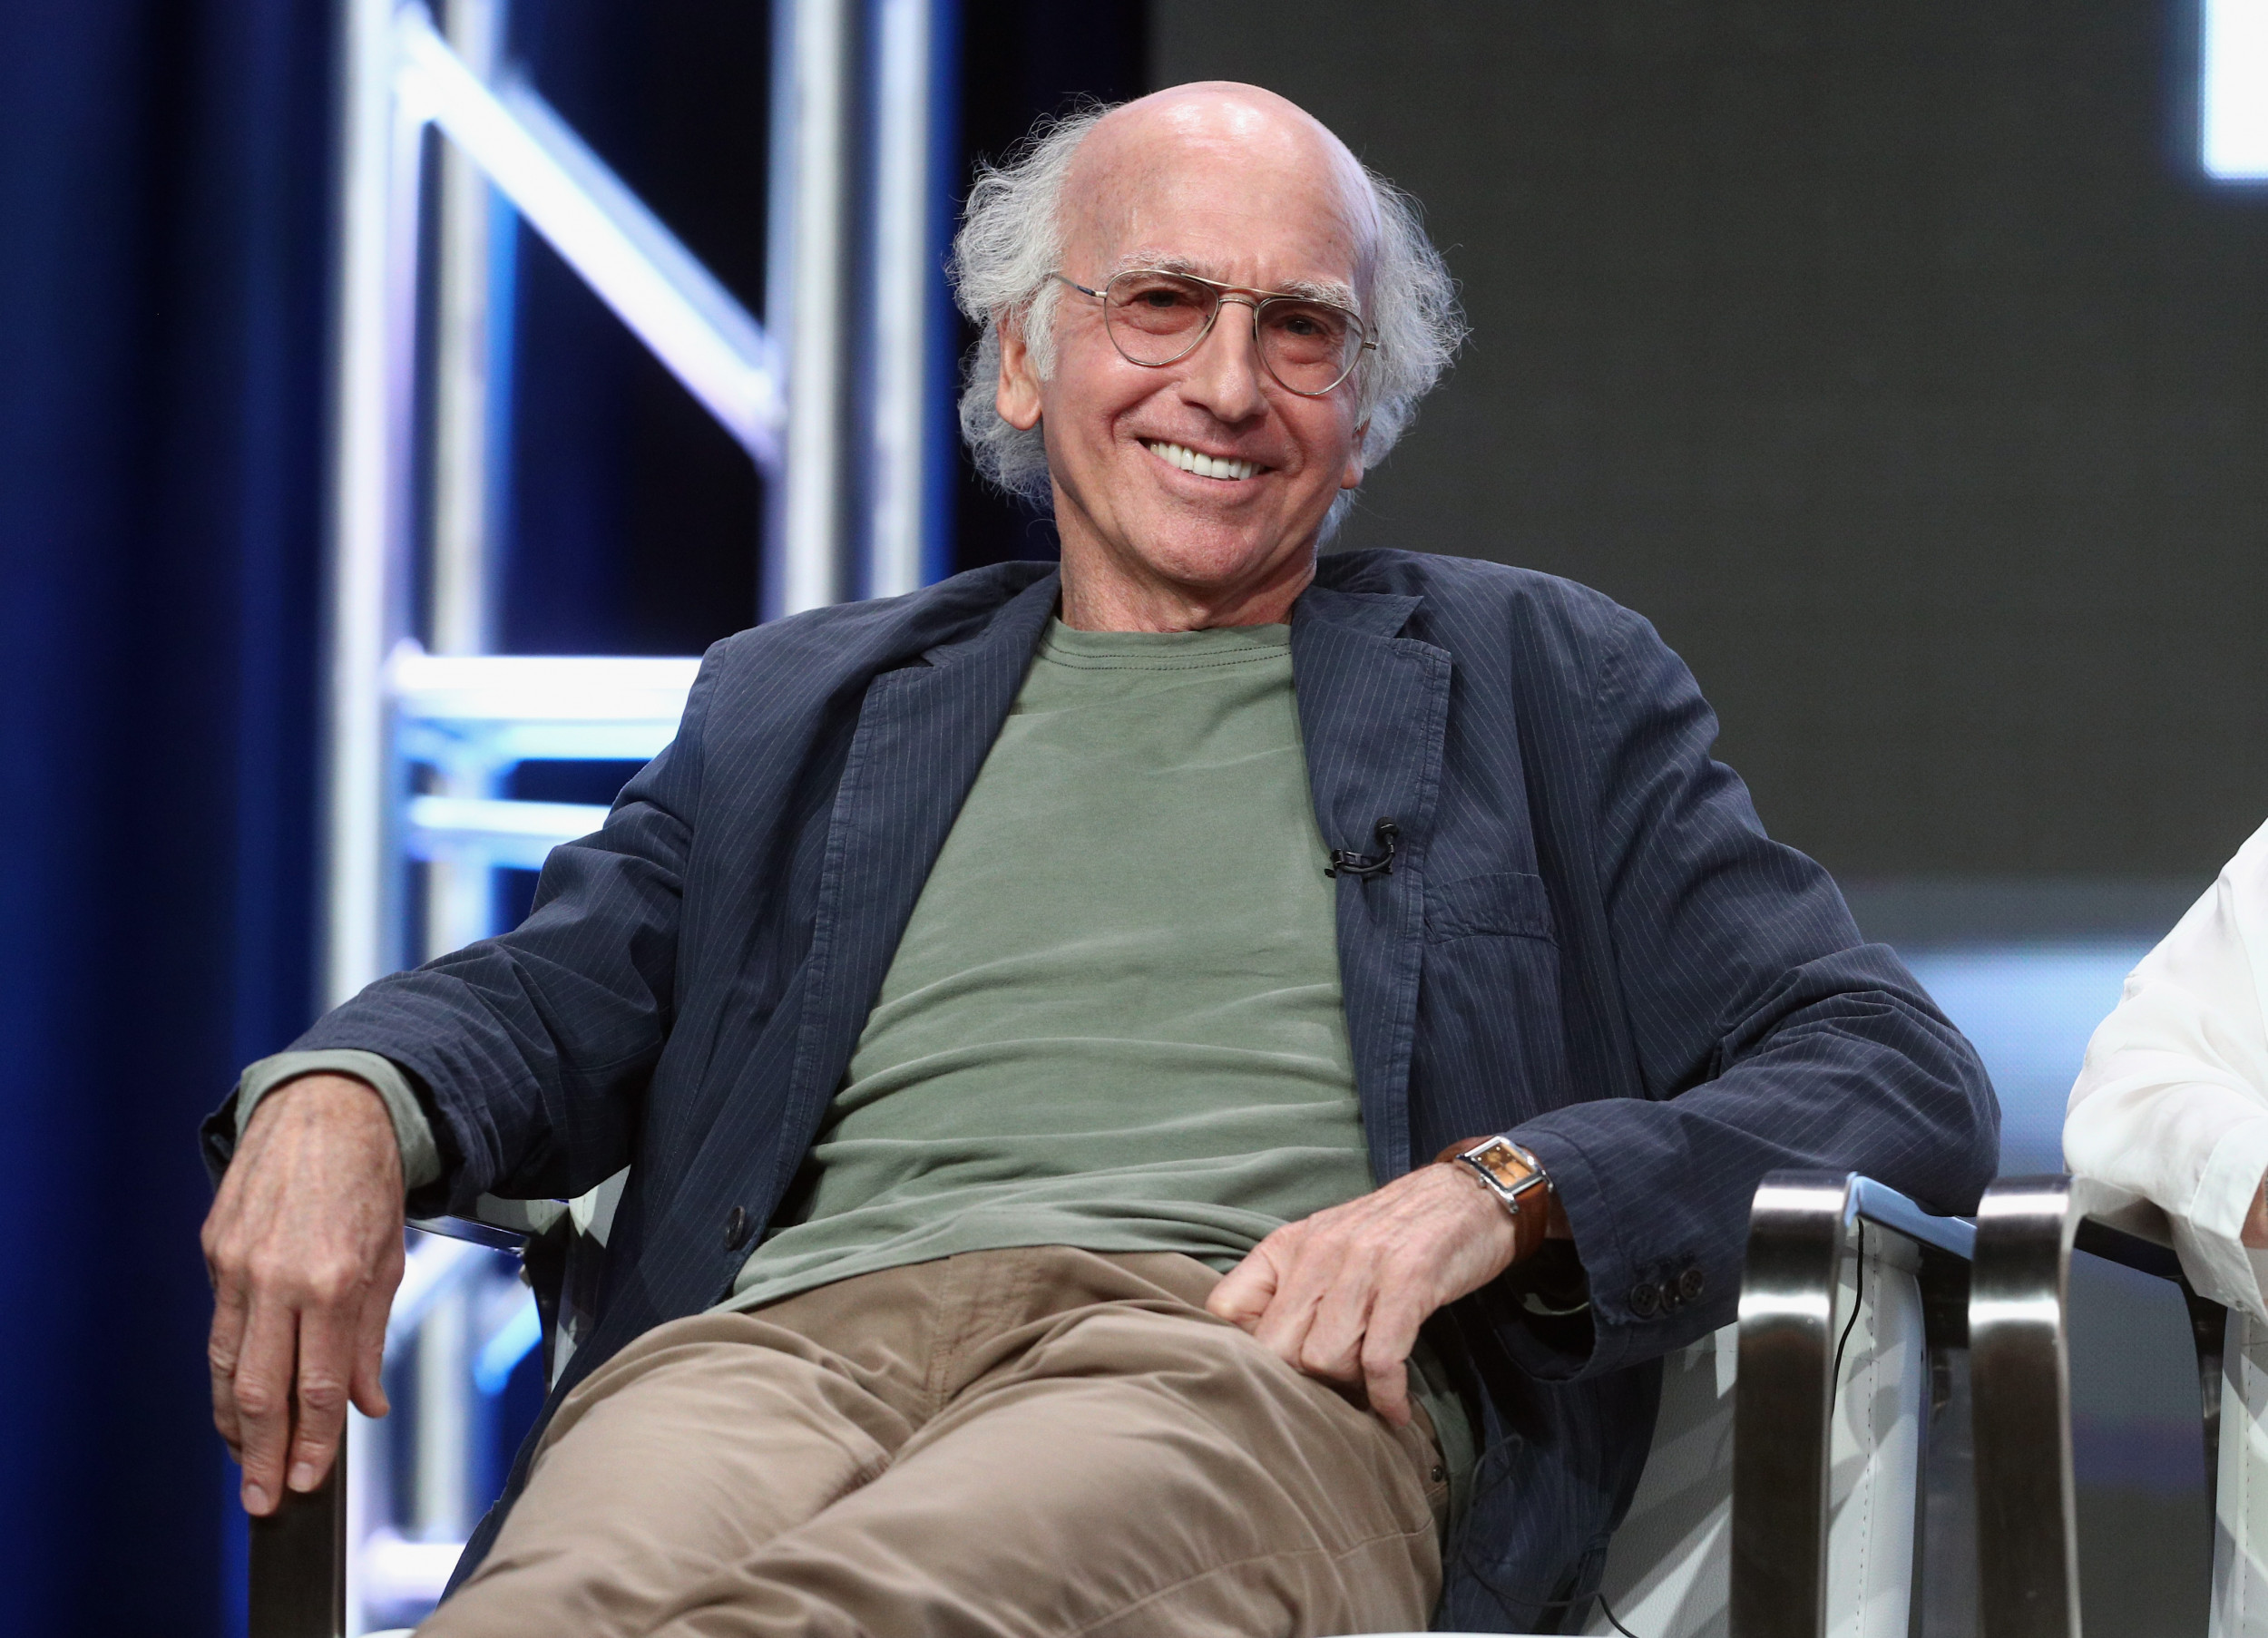 Watch Curb Your Enthusiasm Season 11 Episode 1 Online - Stream Full Episodes